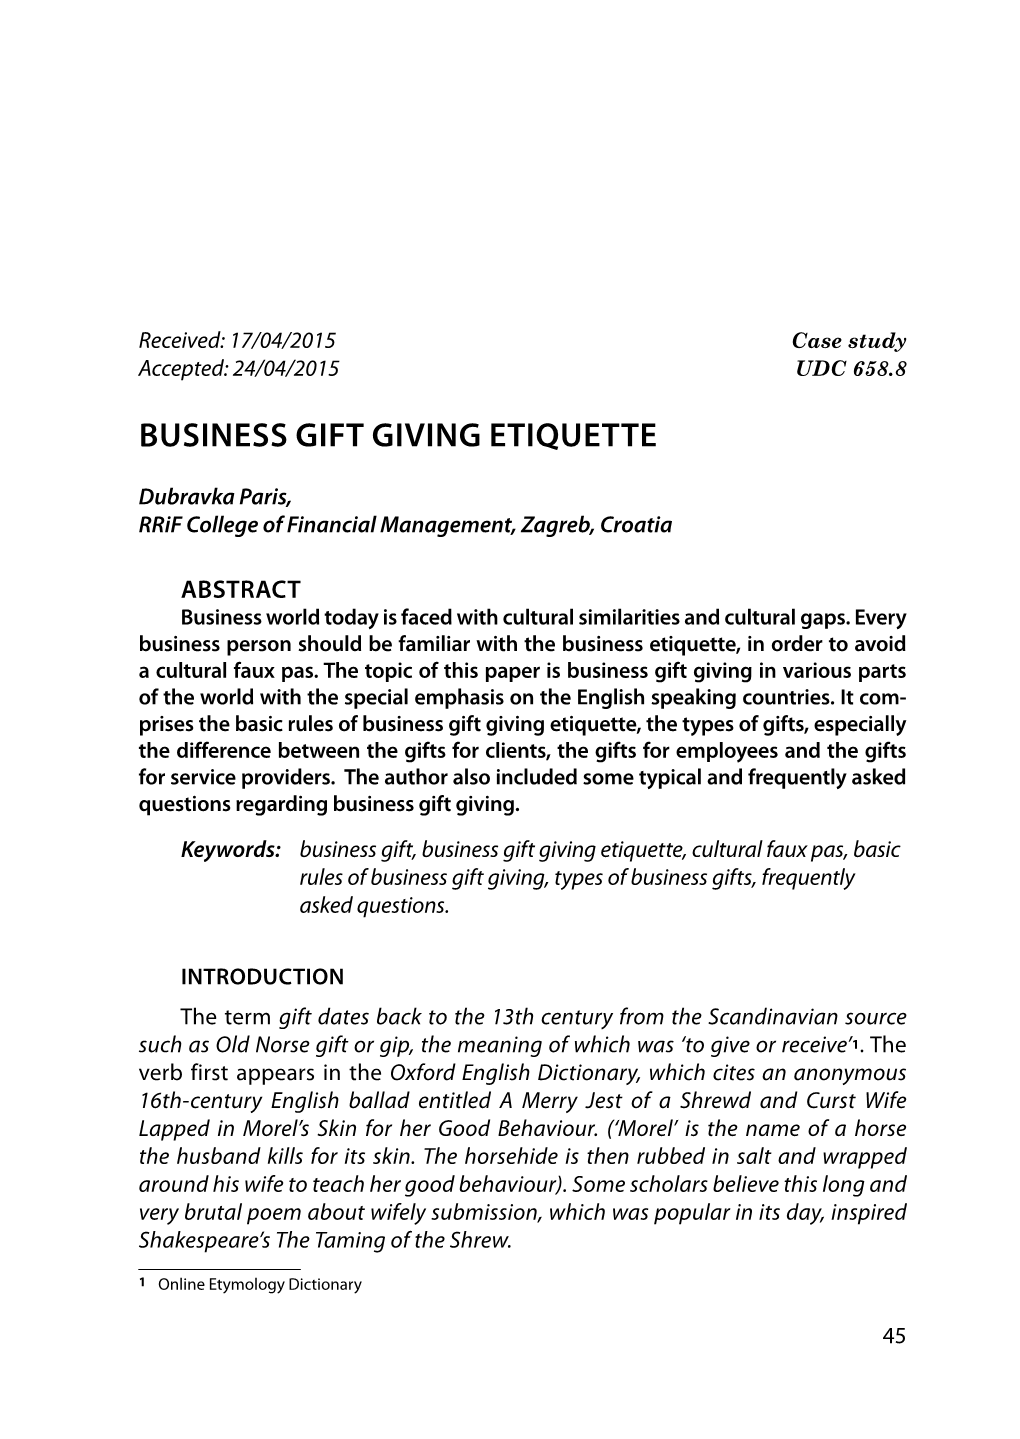 Business Gift Giving Etiquette